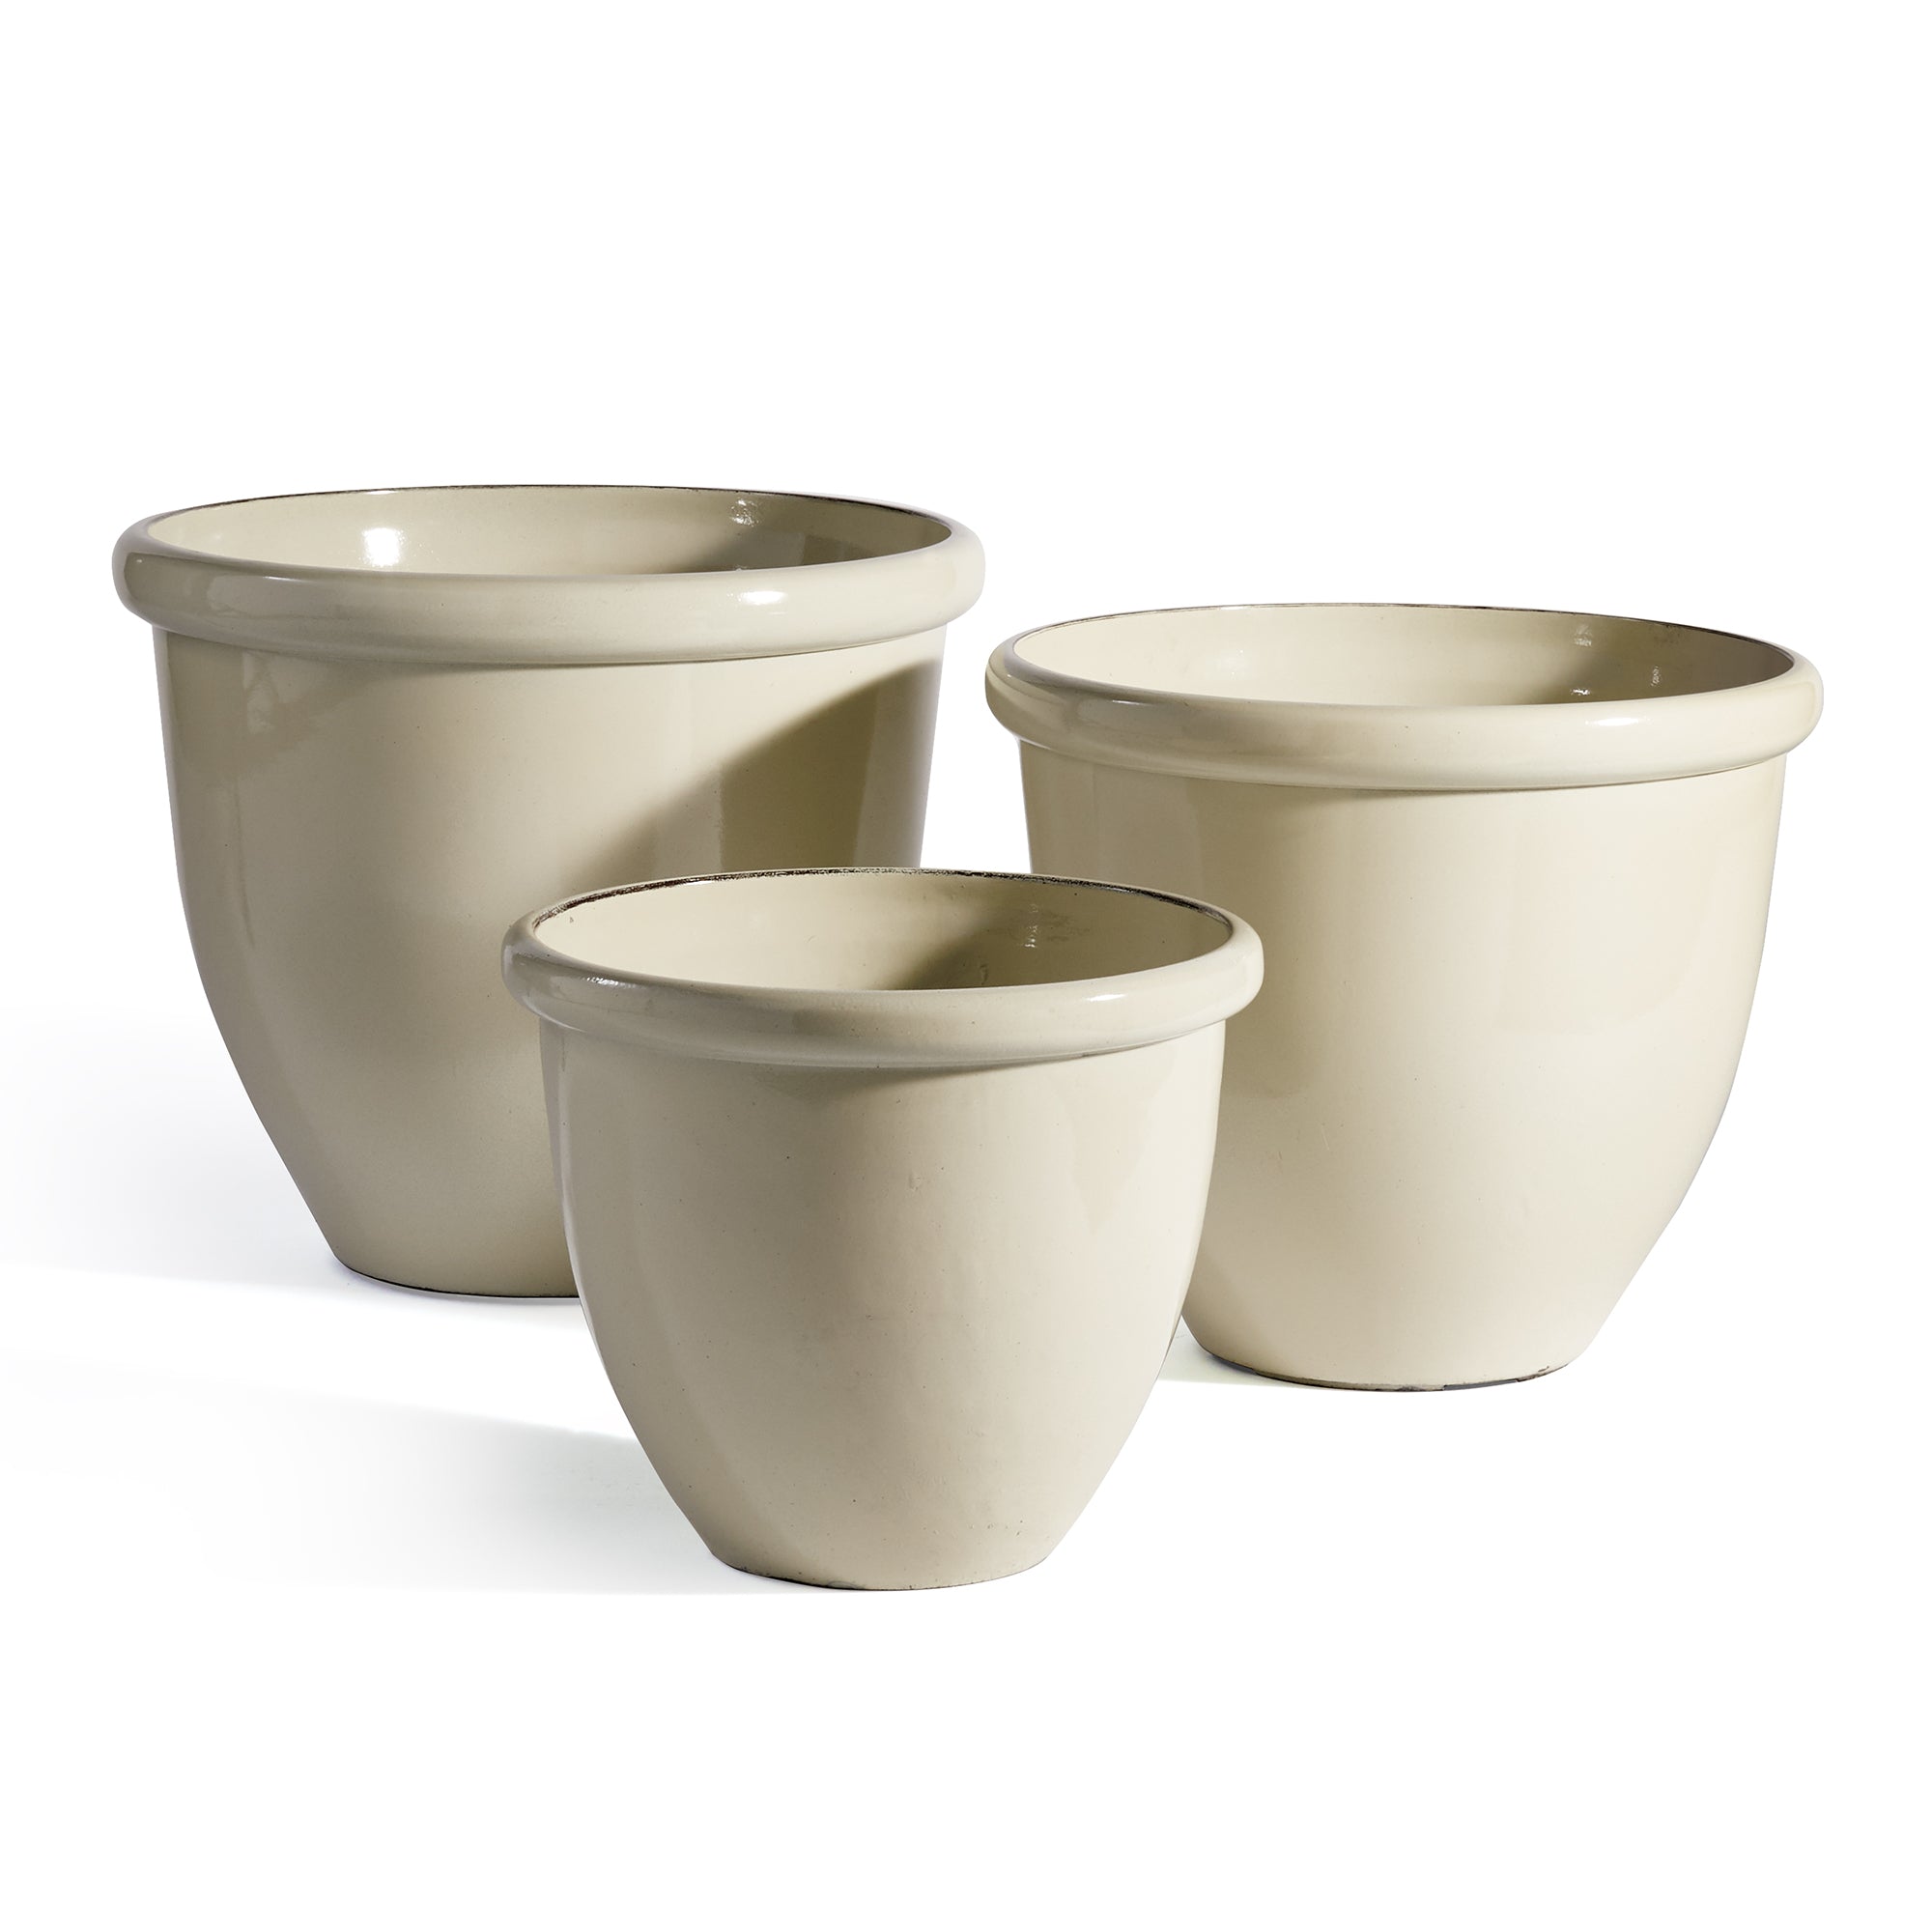 At first glance, Glazelite Planters look like substantial glazed ceramic pots. But with a resin, fiberglass & stone mixture, they are shockingly lightweight. Did we mention they are also frost resistant & UV protected? Perfectly safe for outdoor use. And that finish! Amethyst Home provides interior design, new construction, custom furniture, and area rugs in the Laguna Beach metro area.